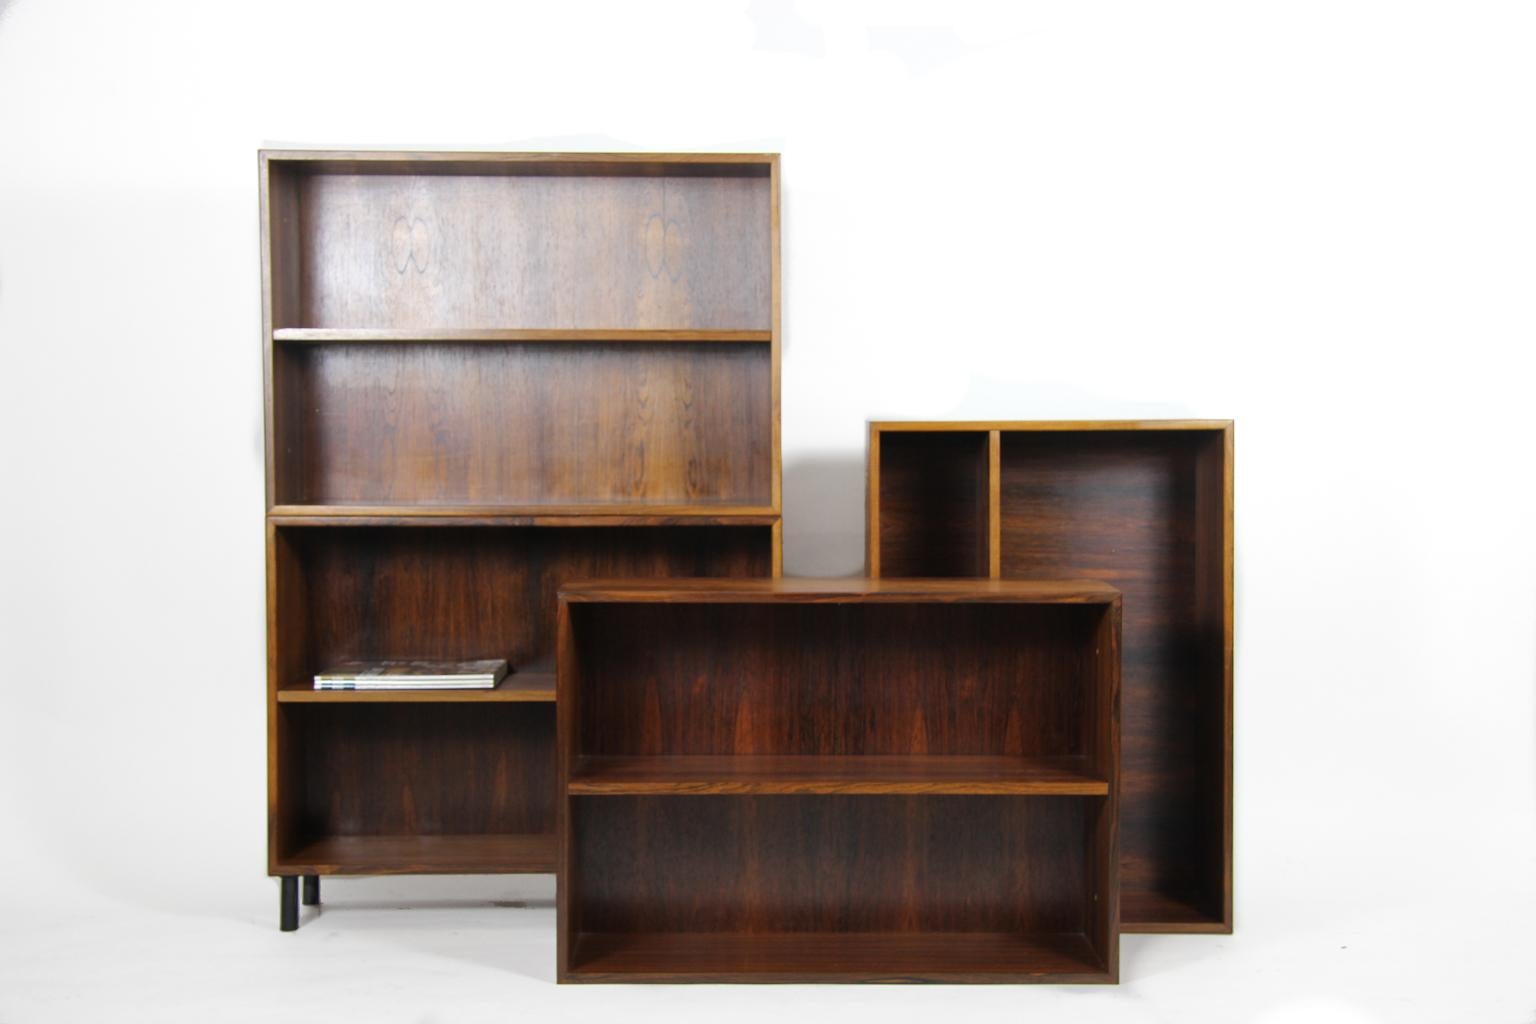 Veneer Rosewood Small Bookcases with Metal Black Legs, Made in Denmark, 1960s For Sale